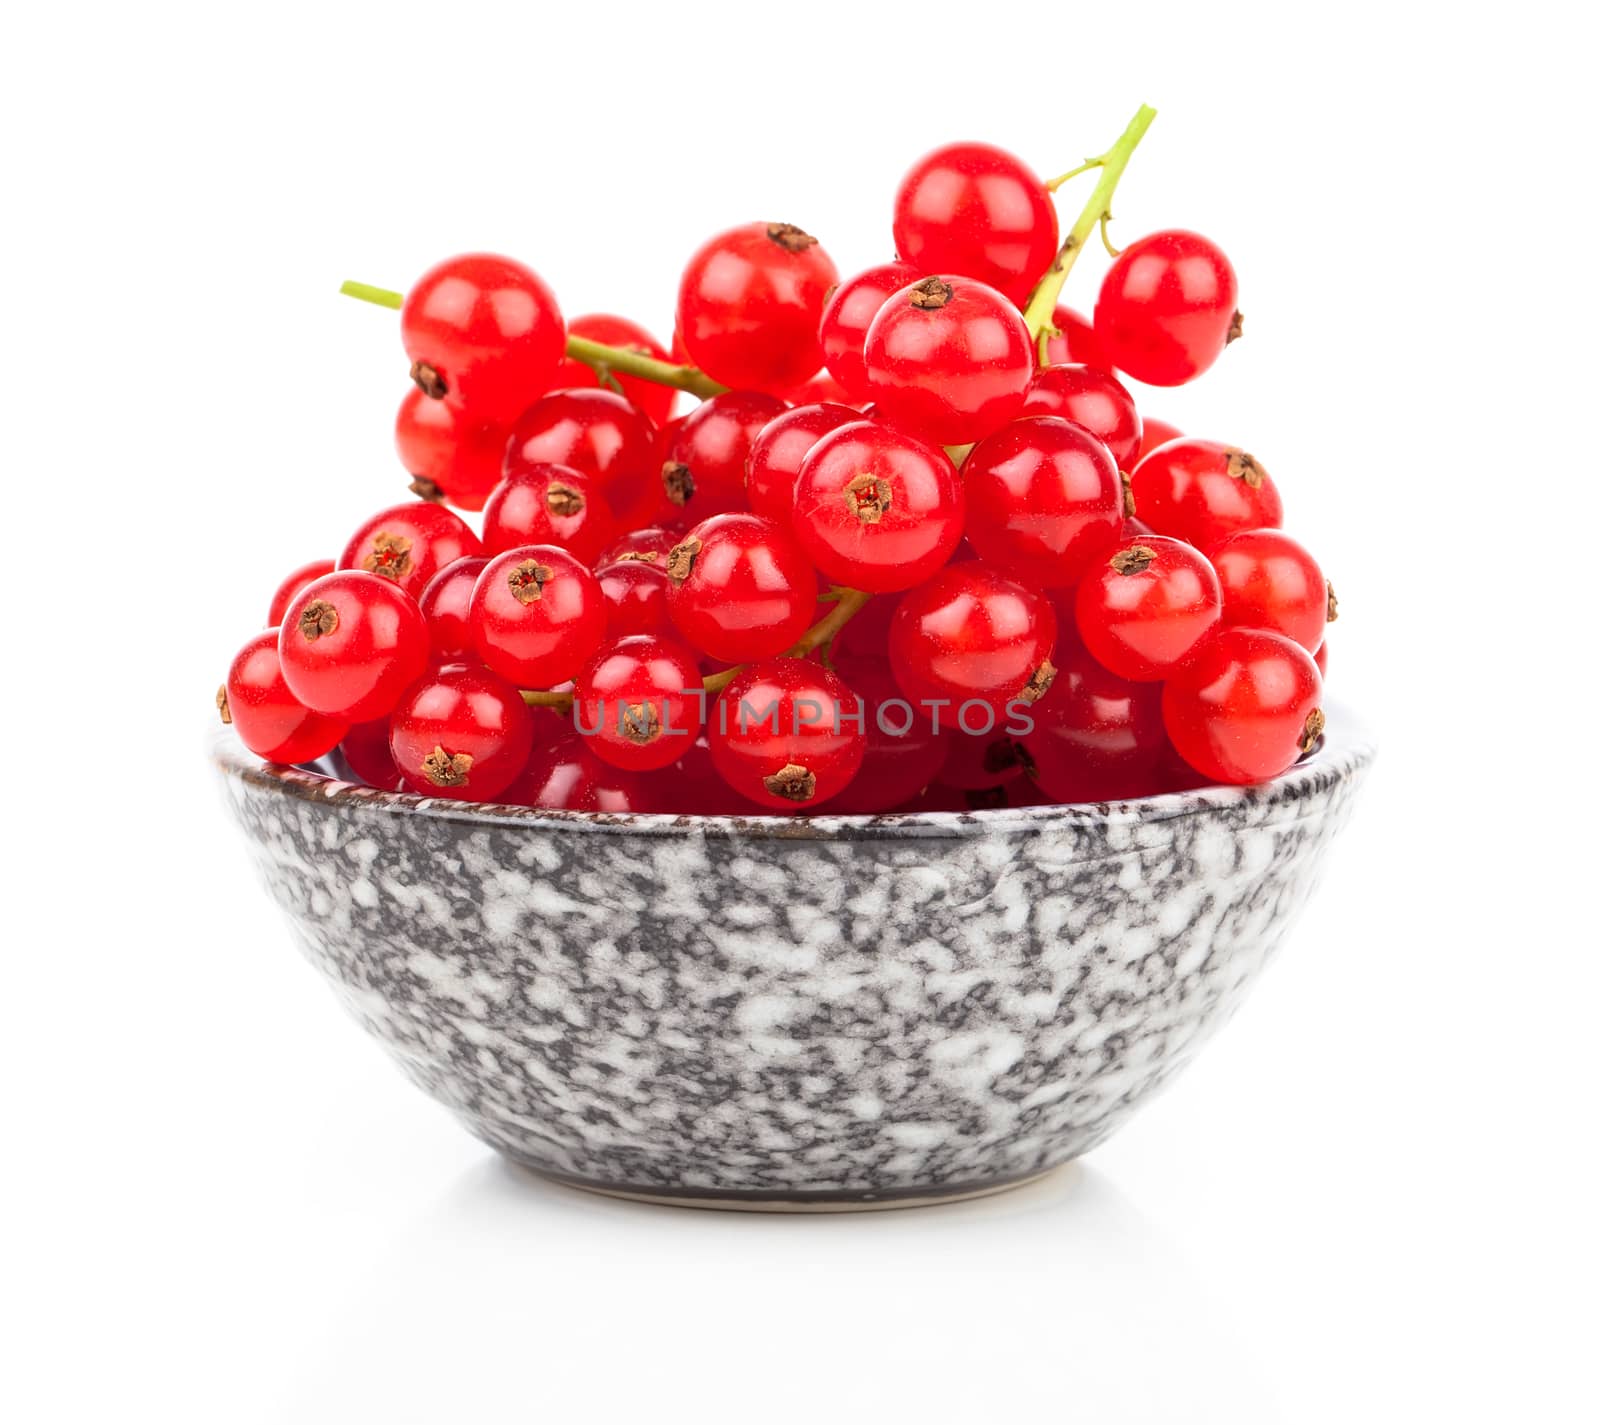 red currant in a bowl, on a white background
 by motorolka